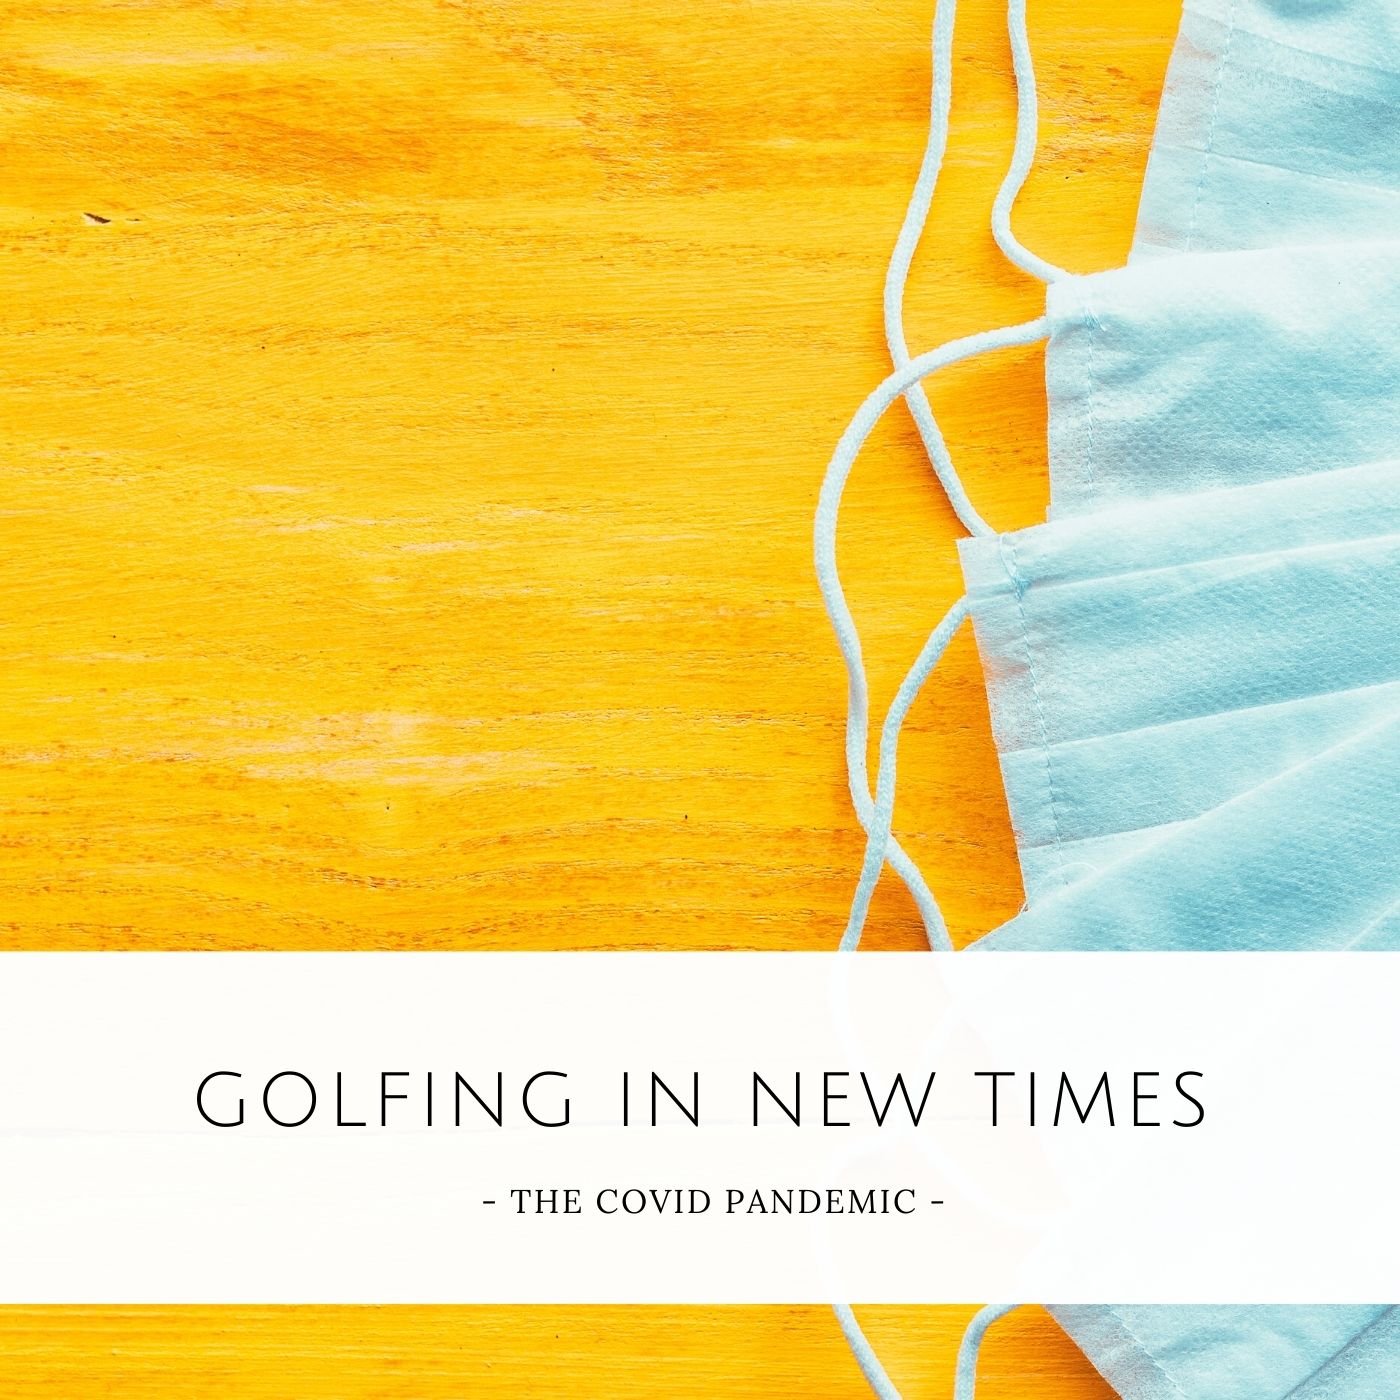 New Times, New Ways to Golf